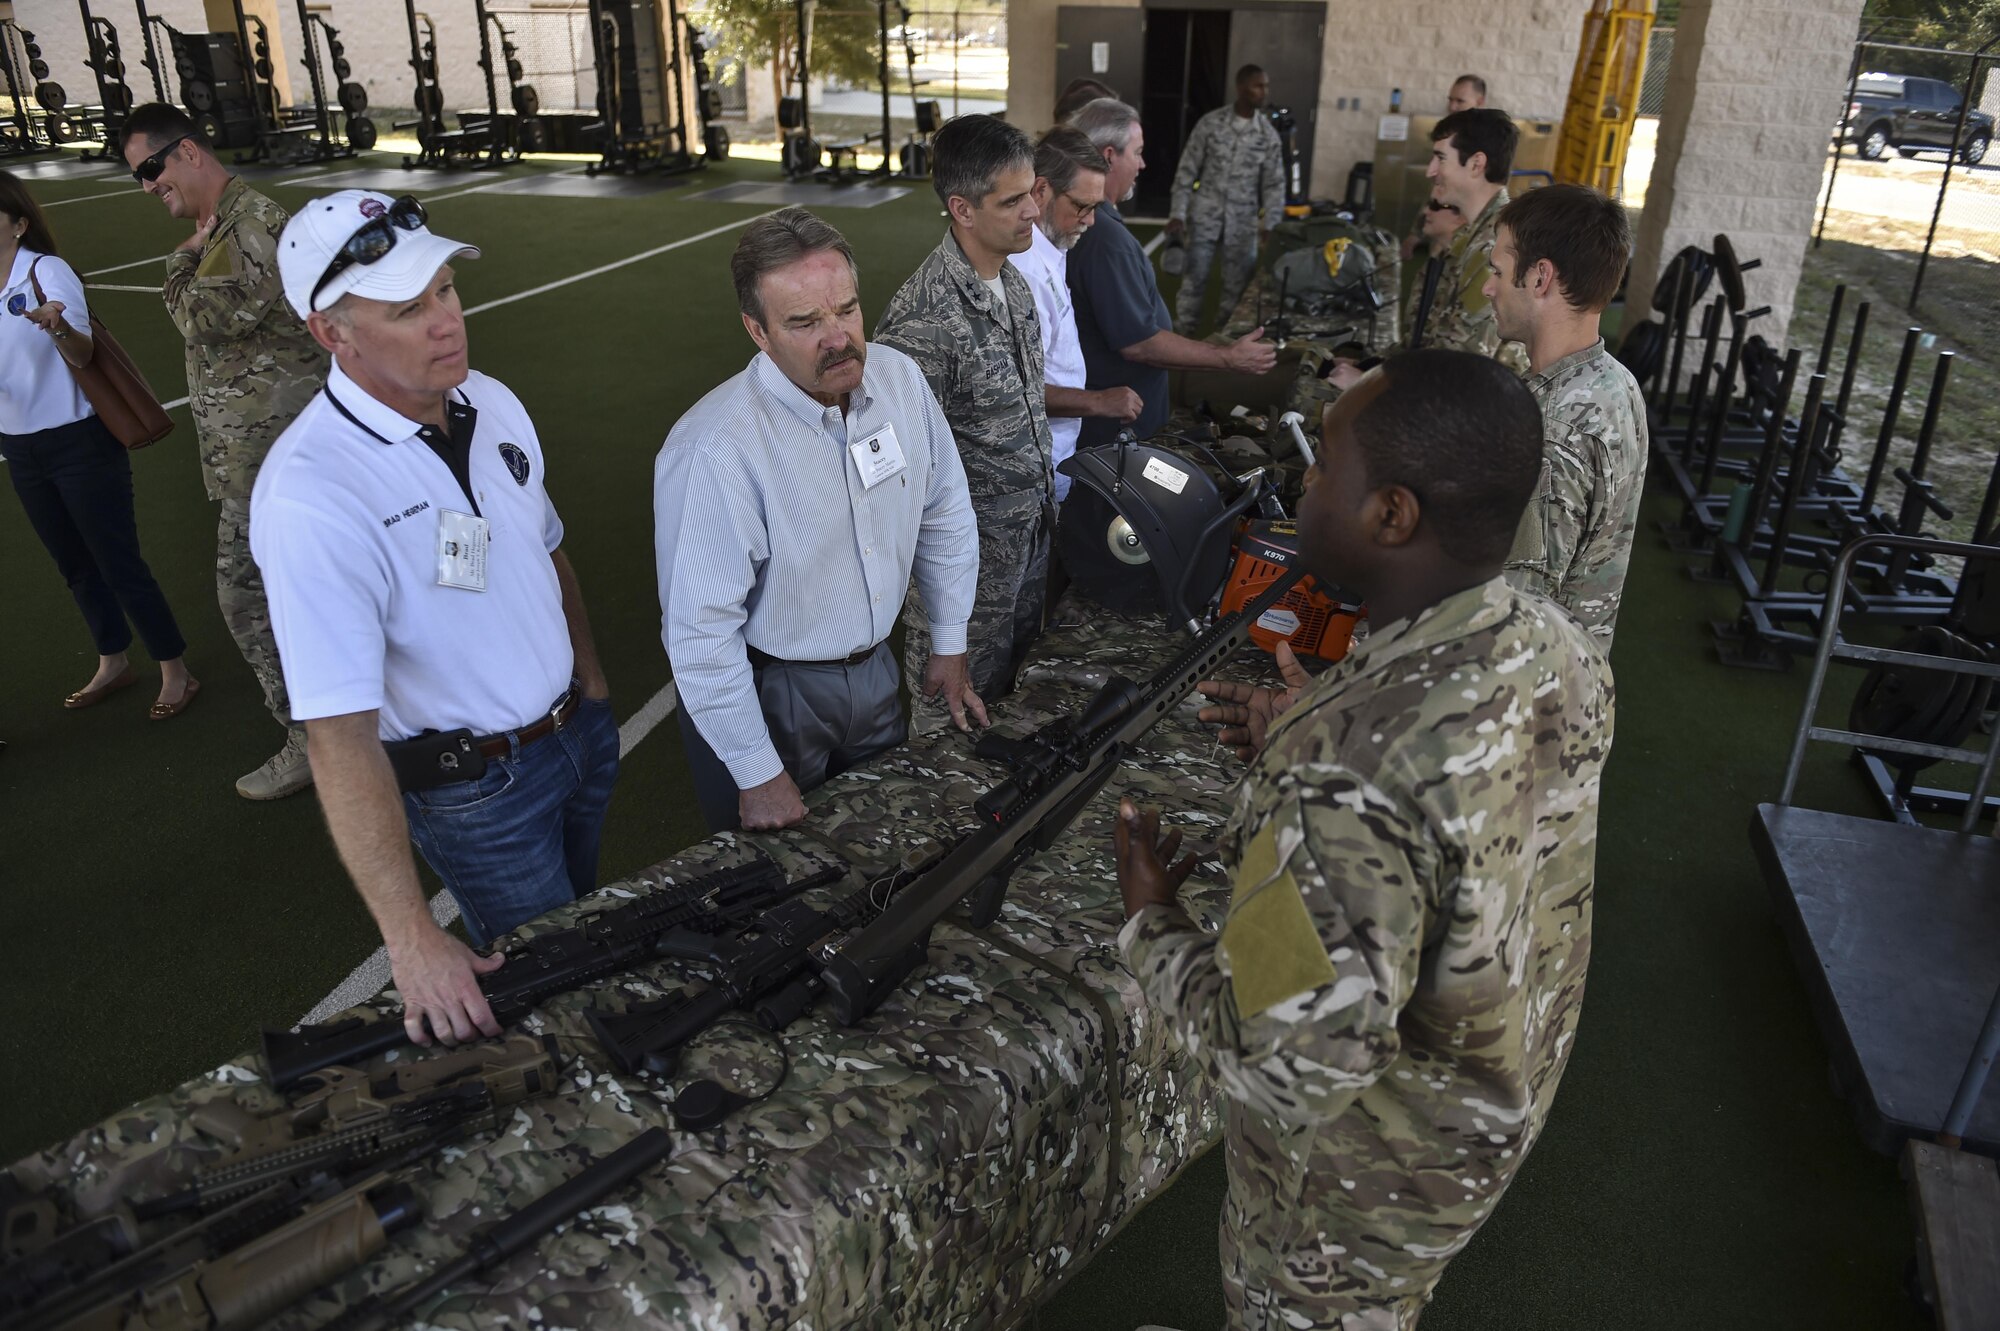 Civic leaders speak to Special Tactics Airmen about various types of equipment used on the battlefield during the Chief of Staff of the Air Force Civic Leader Tour at Hurlburt Field, Fla., Nov. 2, 2016. A group of CSAF civic leaders were given a hands-on tour of Special Tactics capabilities and offered a unique perspective of the Air Force’s ground operators through several operational demonstrations.  (U.S. Air Force photo by Senior Airman Ryan Conroy)